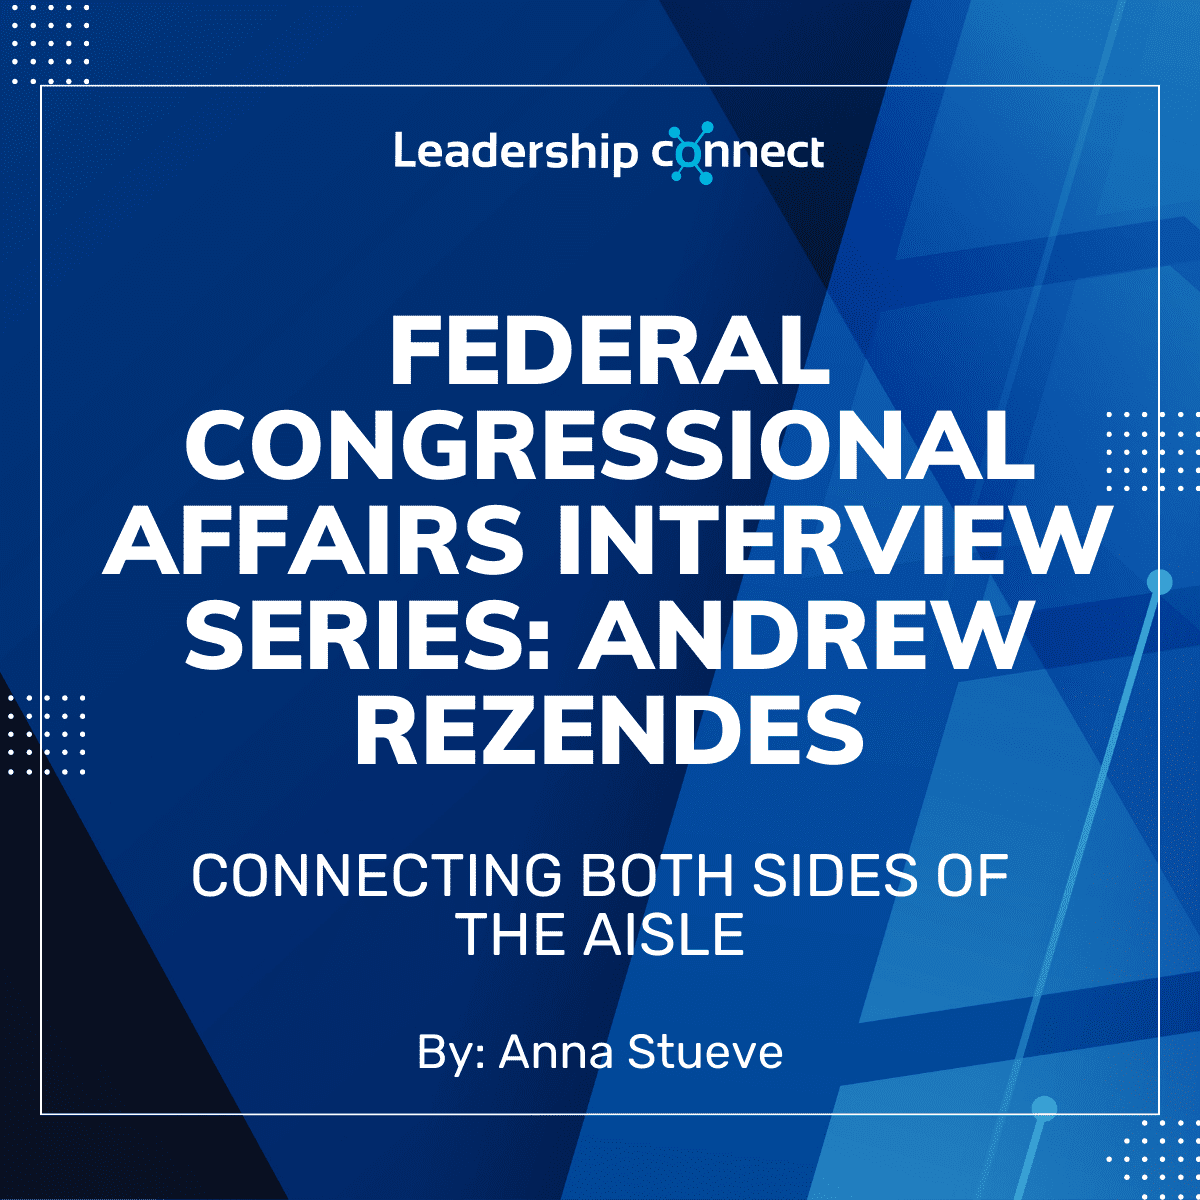 Federal Congressional Affairs Interview Series with Andrew Rezendes